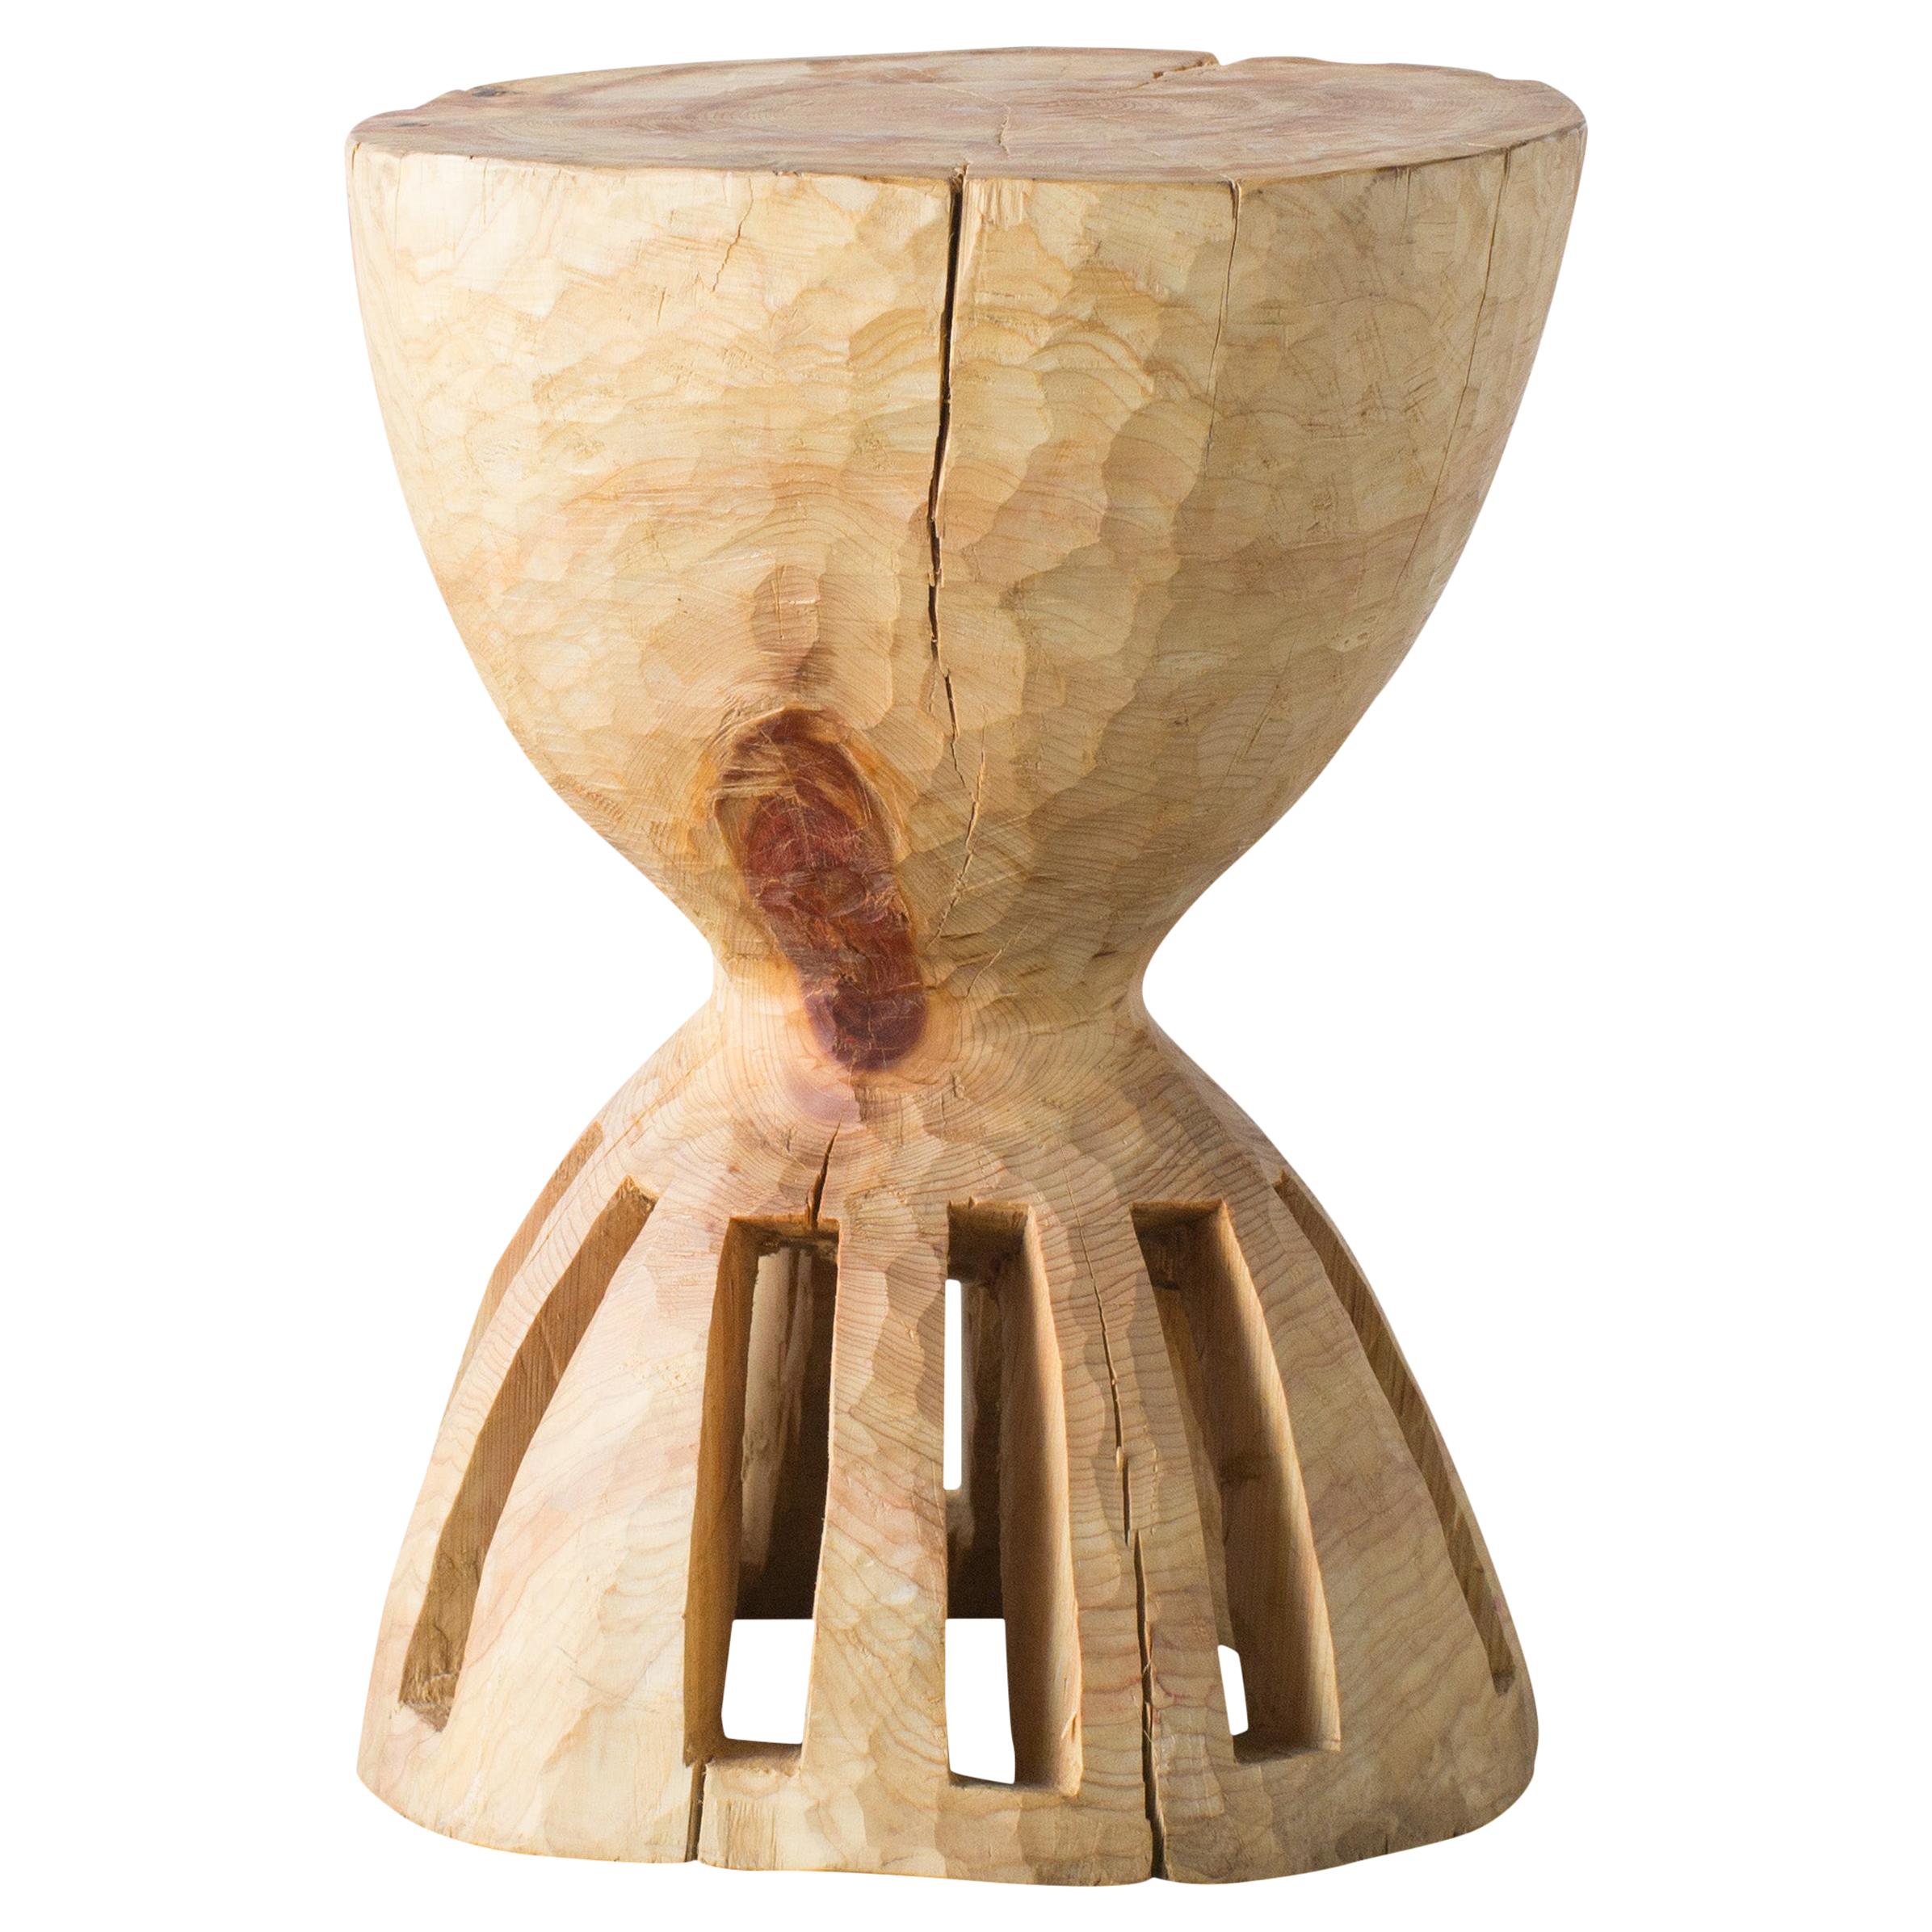 Name: Observatory
Sculptural stool by Hiroyuki Nishimura and zone carved furniture
Material: cypress
This work is carved from log with some kinds of chainsaws.
Most of wood used for Nishimura's works are unable to use anything, these woods are